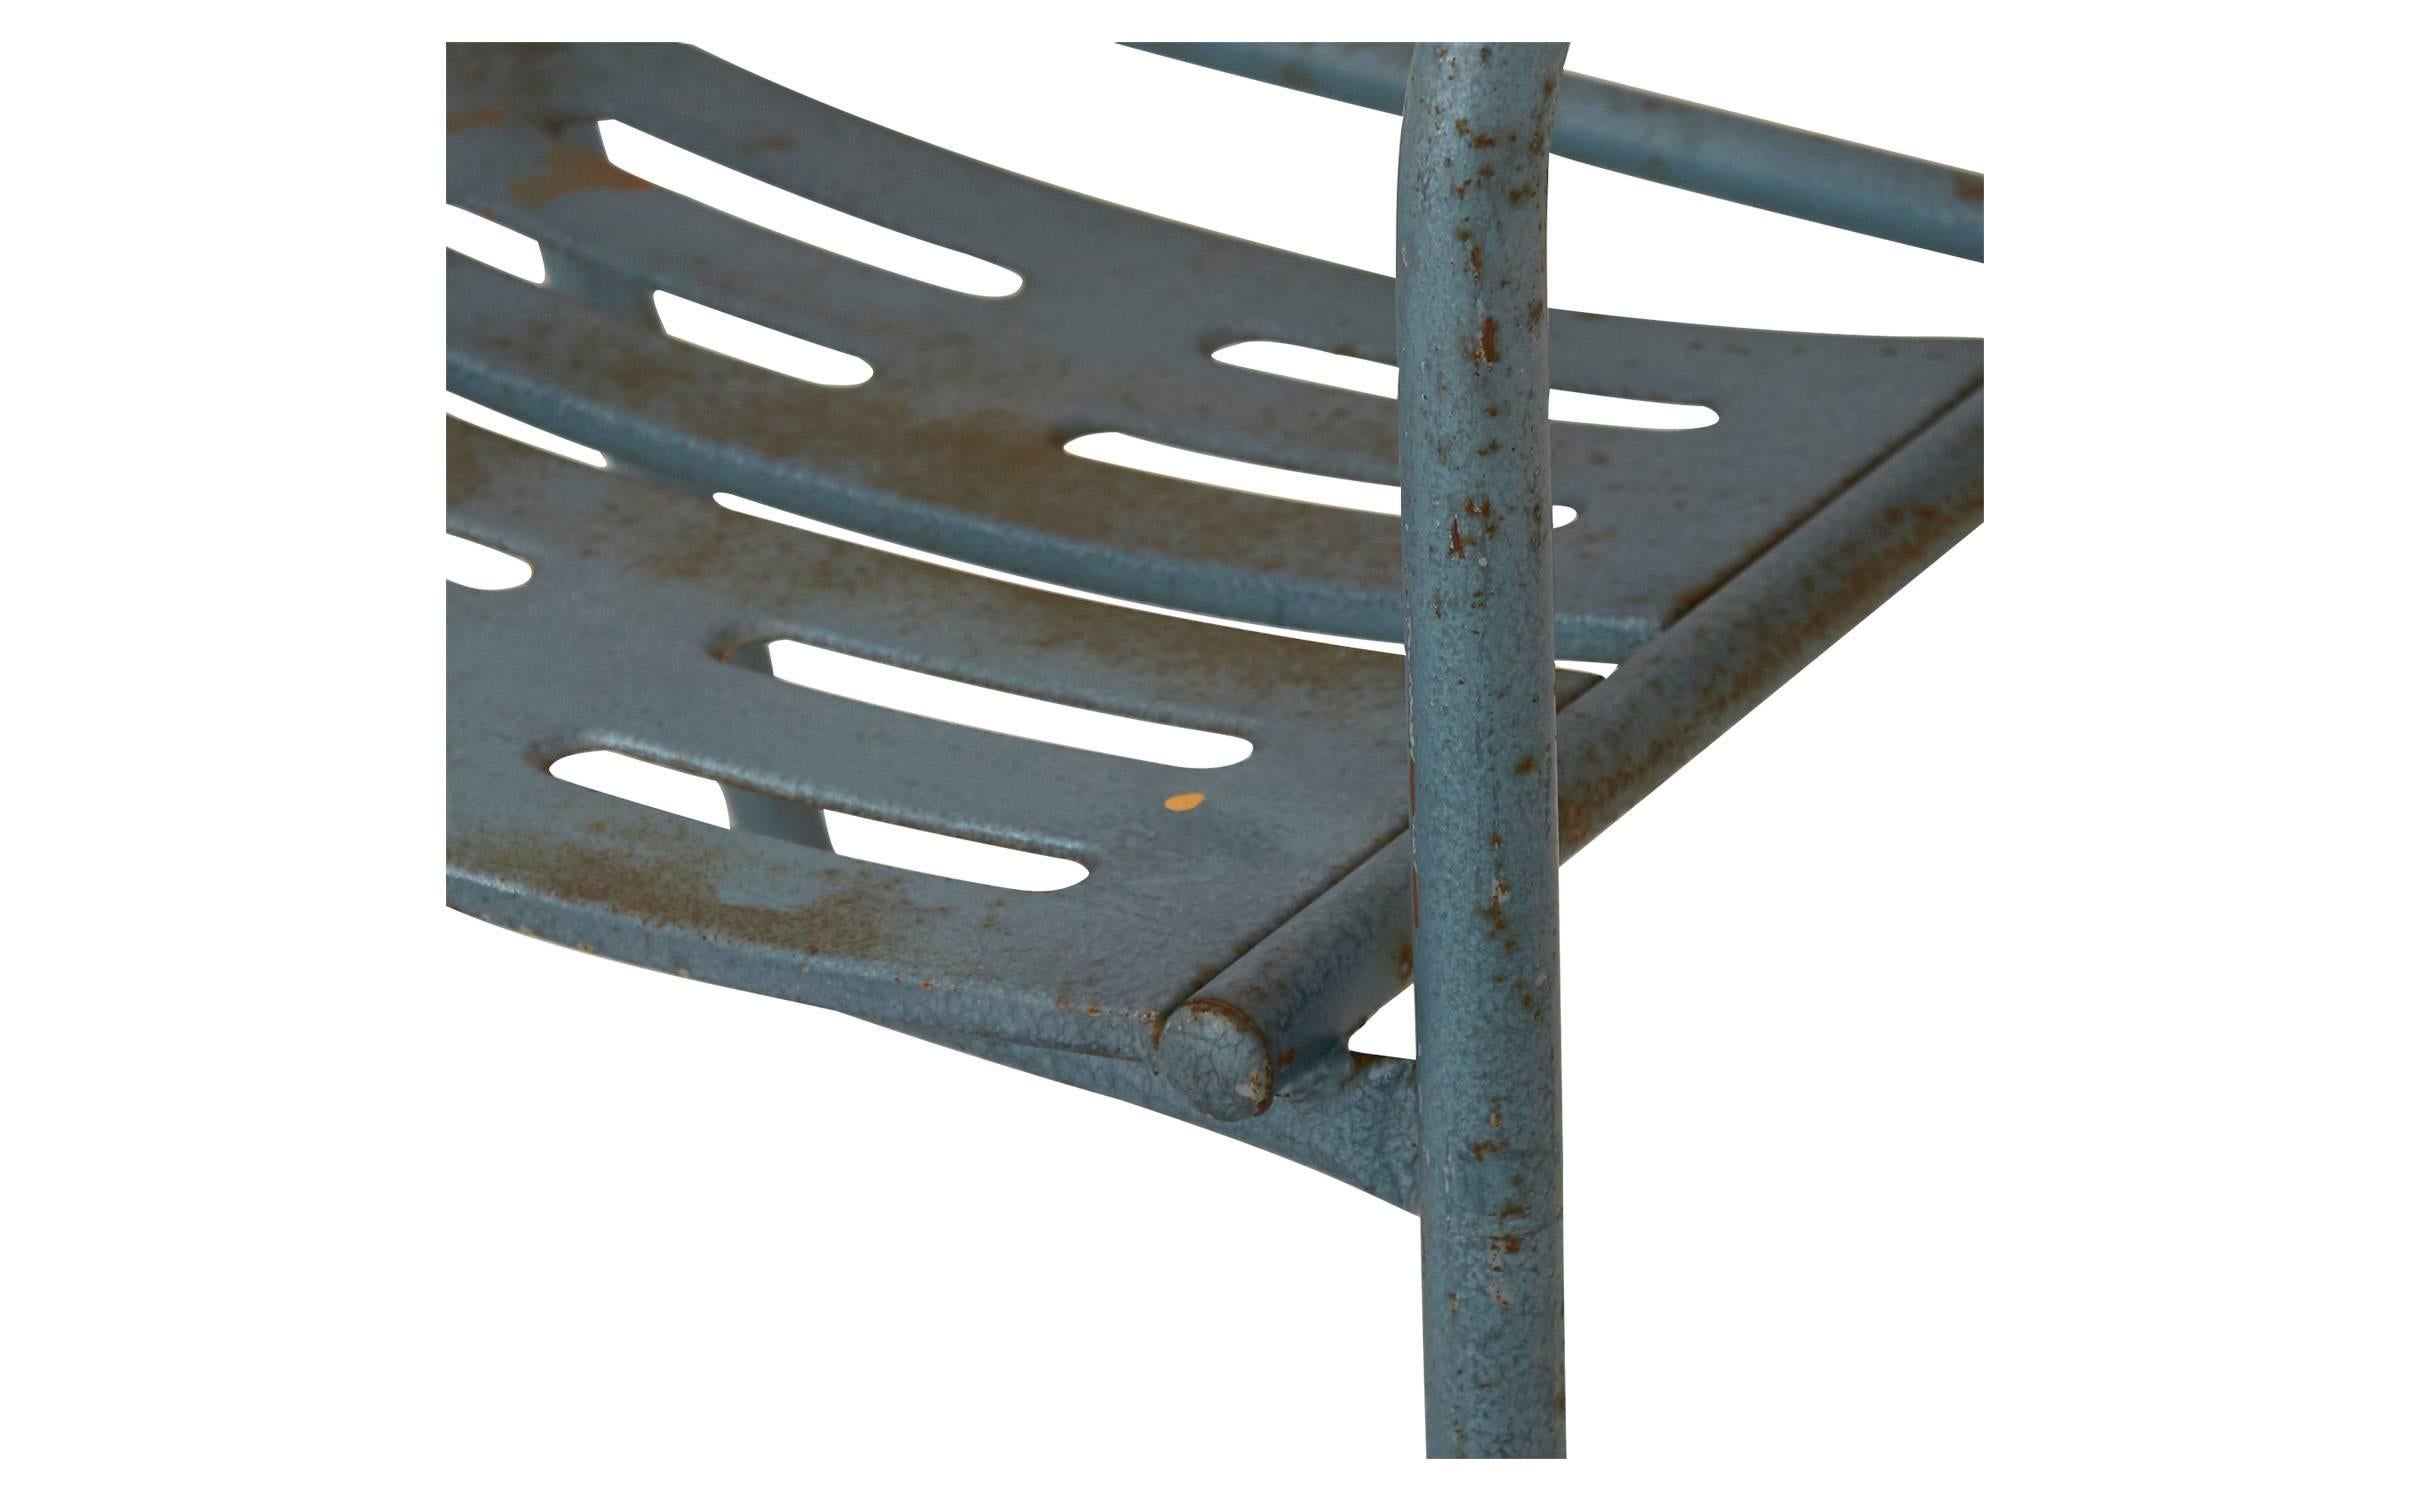 •Patinaed Metal
•20th century
•From Spain

Dimensions
•Overall: 20'W x 15'D x 29.5'H 
•Seat height: 16'H
•Arm height: 24.5'H